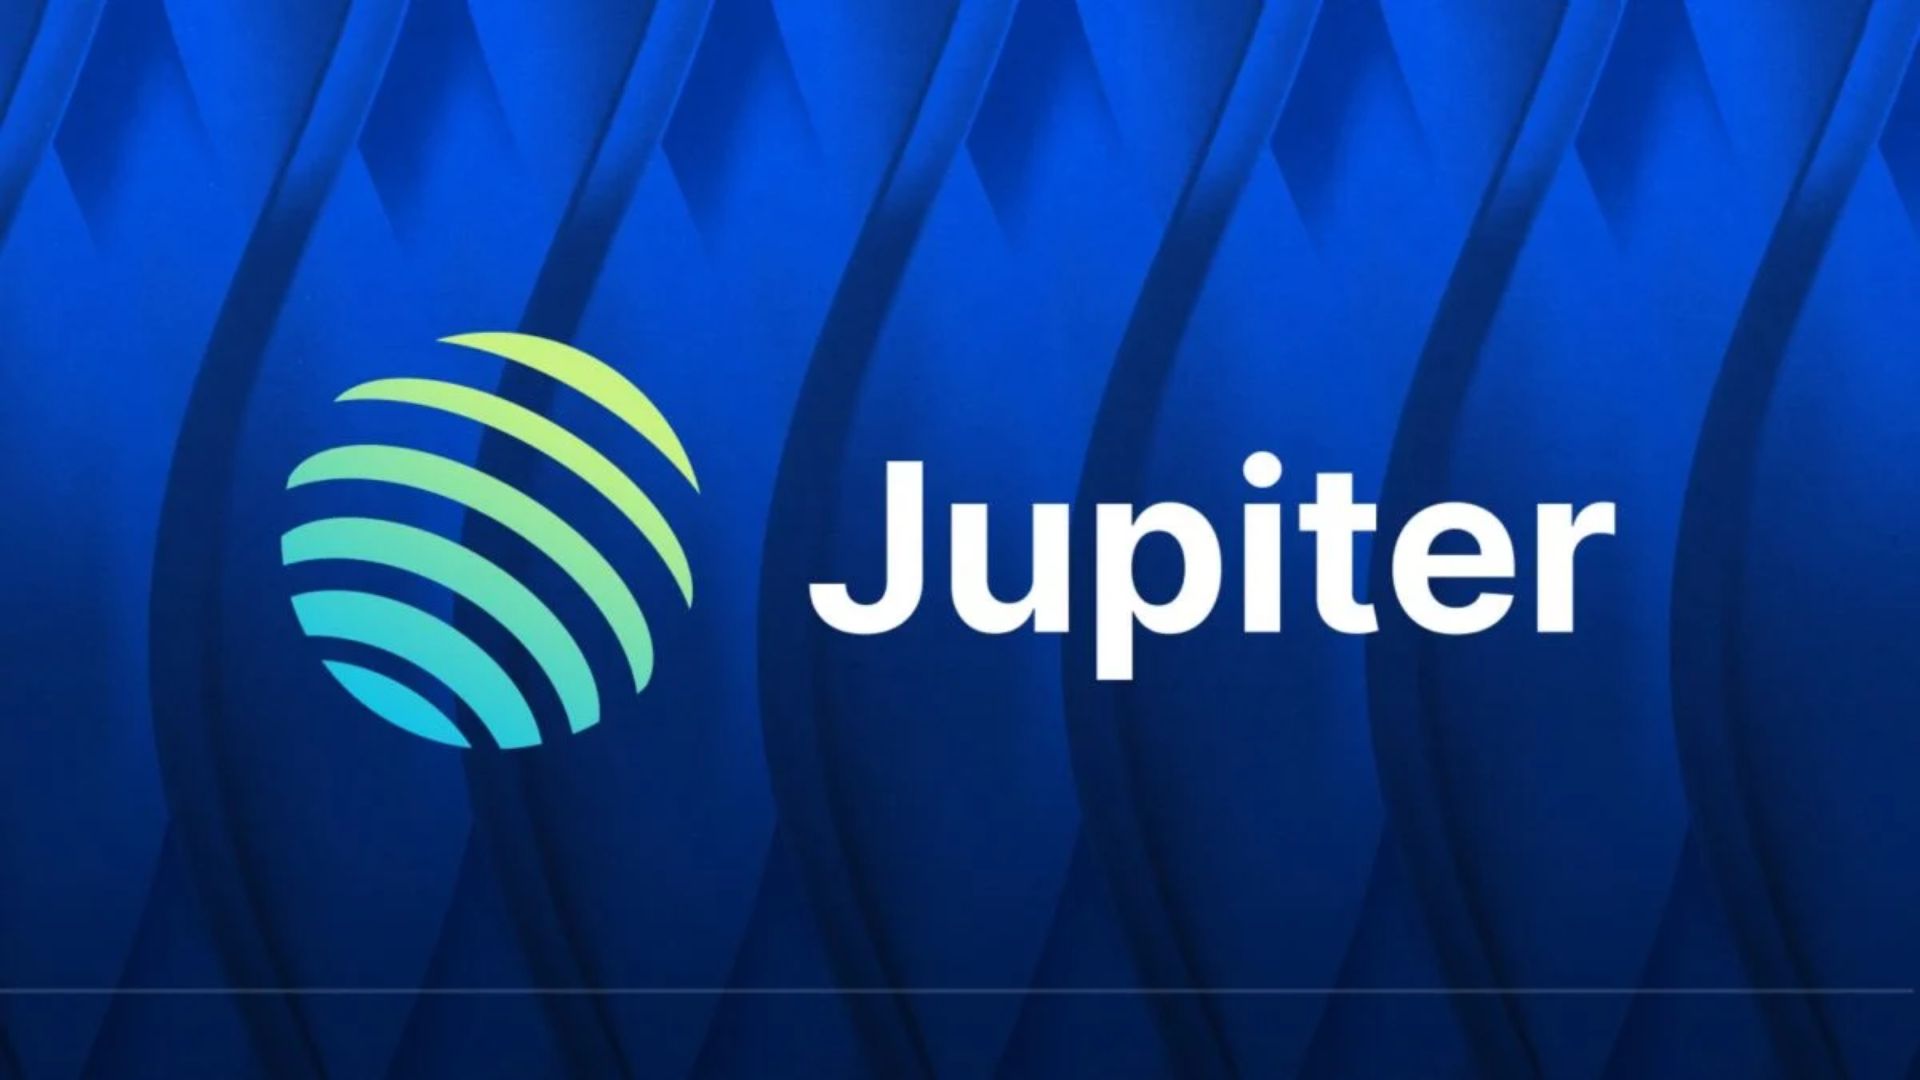 Jupiter Price Prediction: Solana Token JUP Bounces Back With 8% Surge, But Analysts Say Consider Meme Coin SpongeV2 On Polygon For 100X Gains